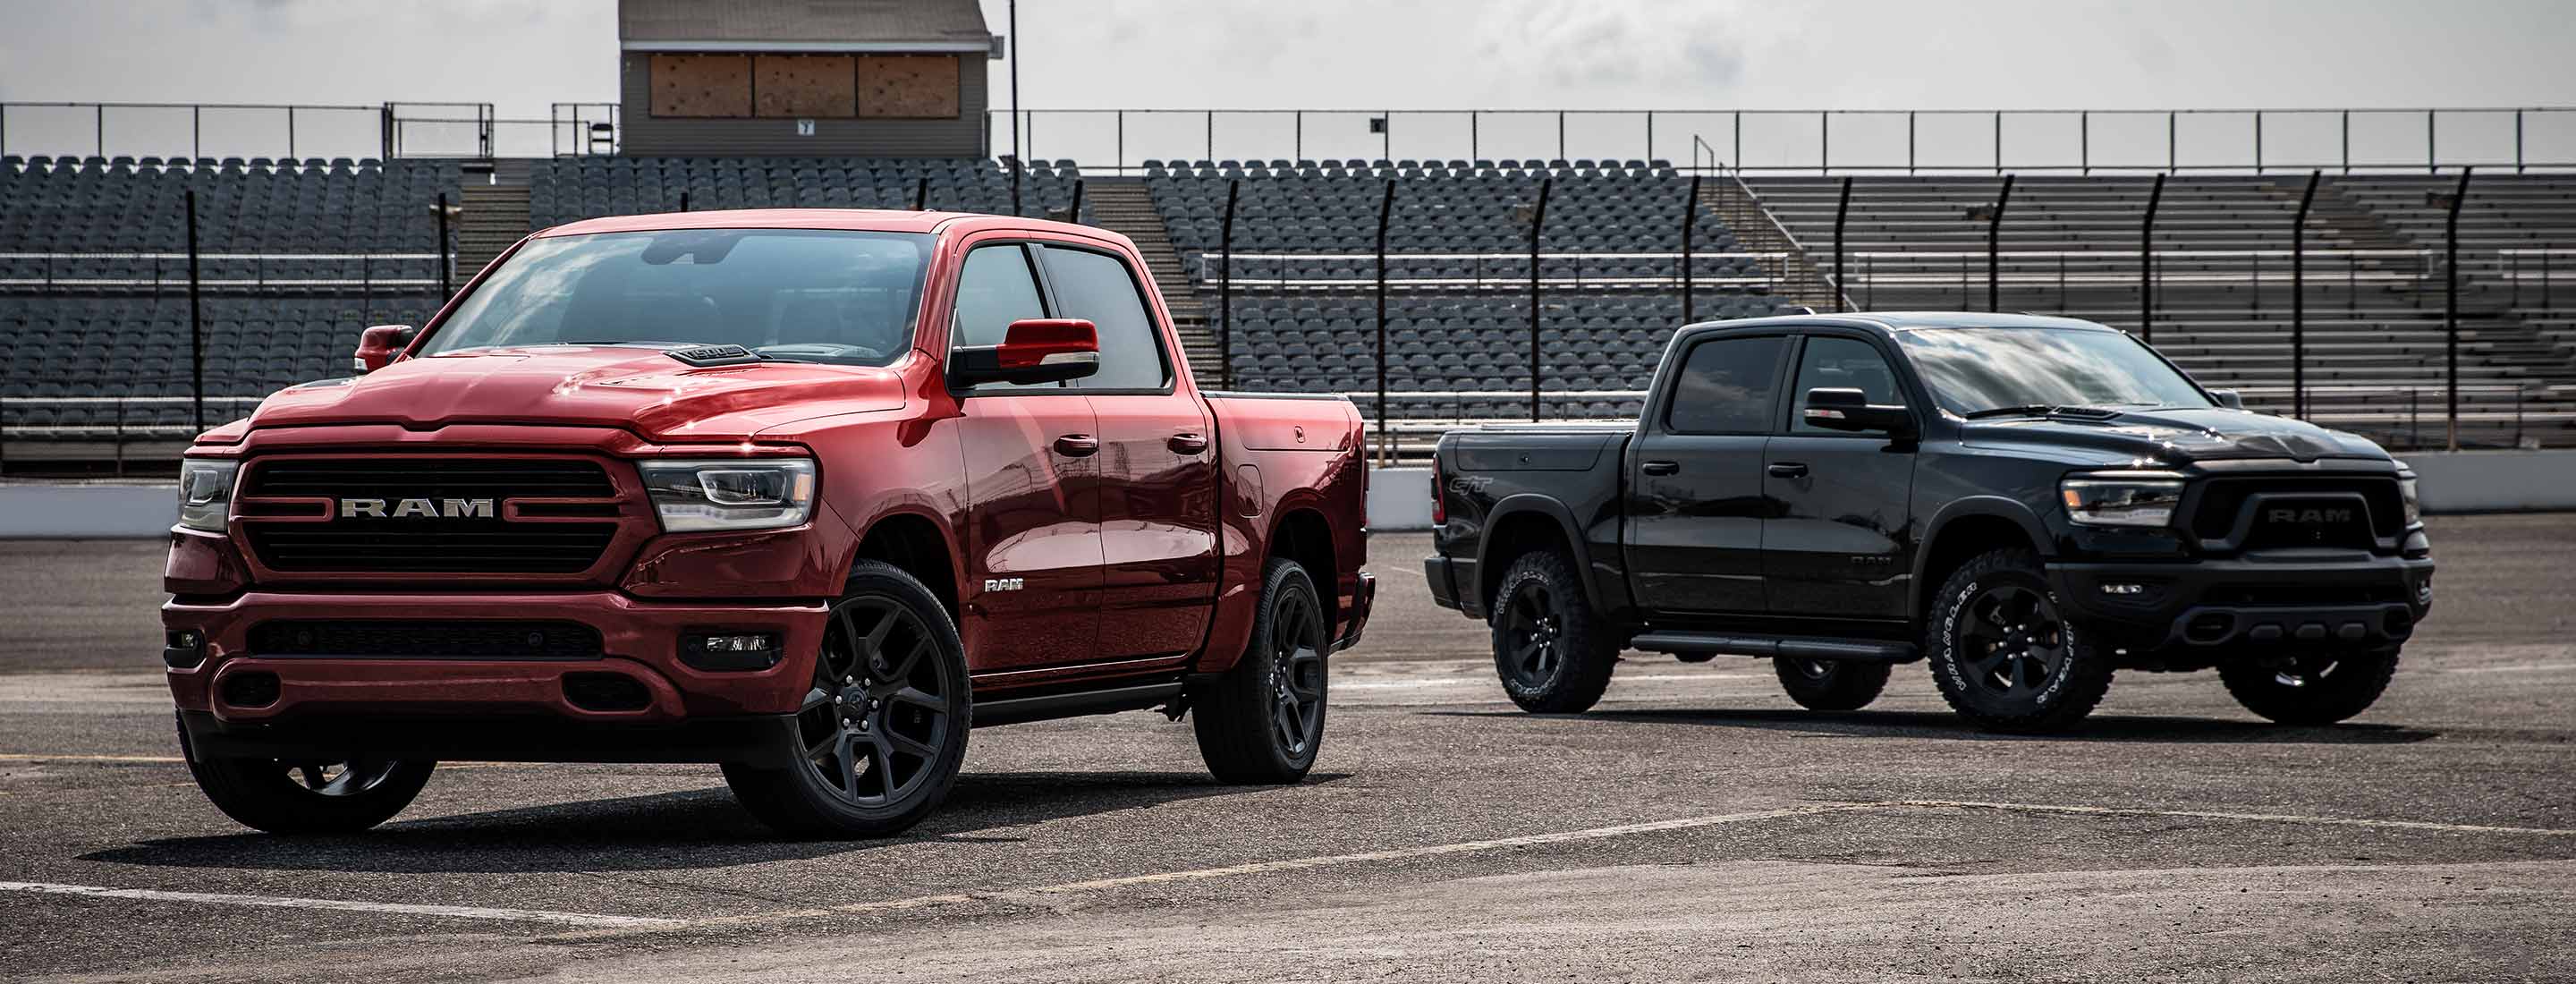 Two Ram 1500 models parked at a racetrack. On the left, a red 2024 Ram 1500 Laramie G/T Crew Cab and on the right, a black 2024 Ram 1500 Rebel G/T Crew Cab.